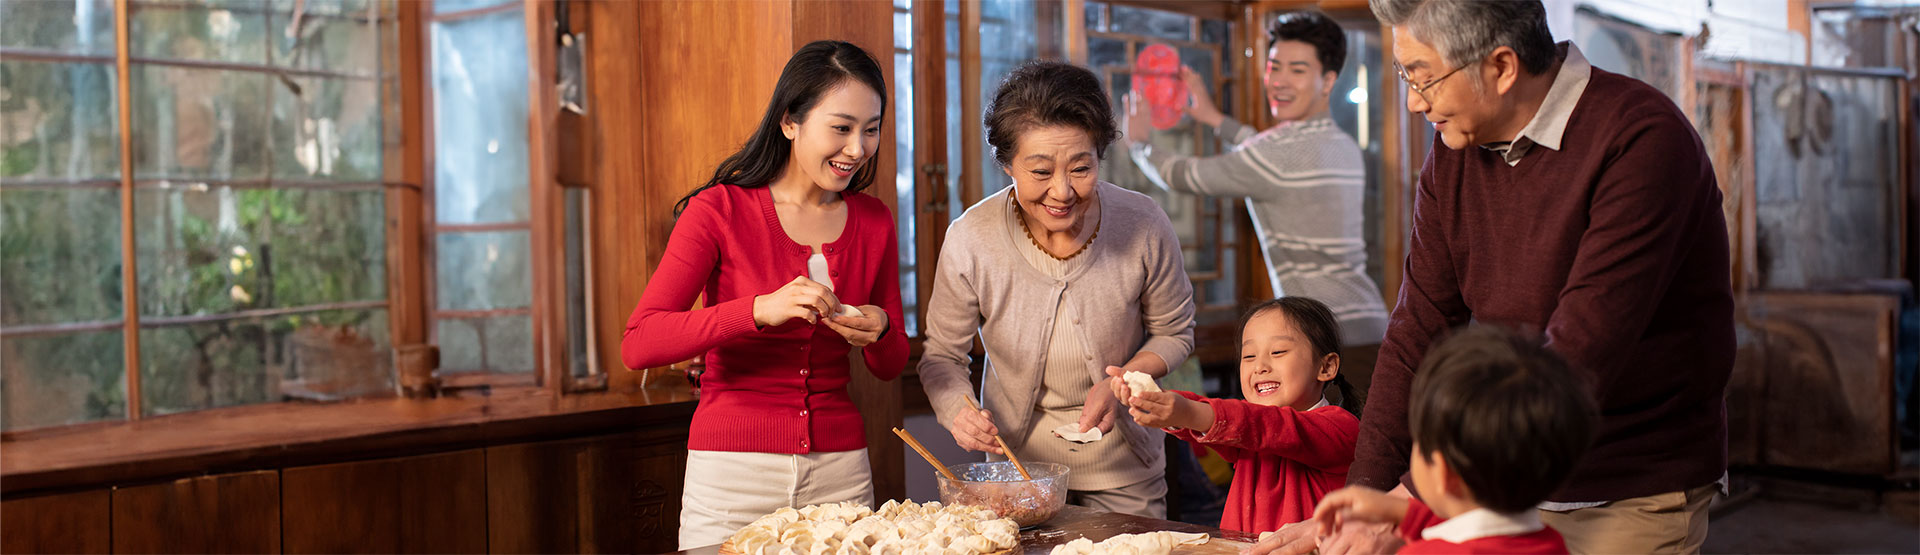 A Chinese family makes dumplings together in their home.